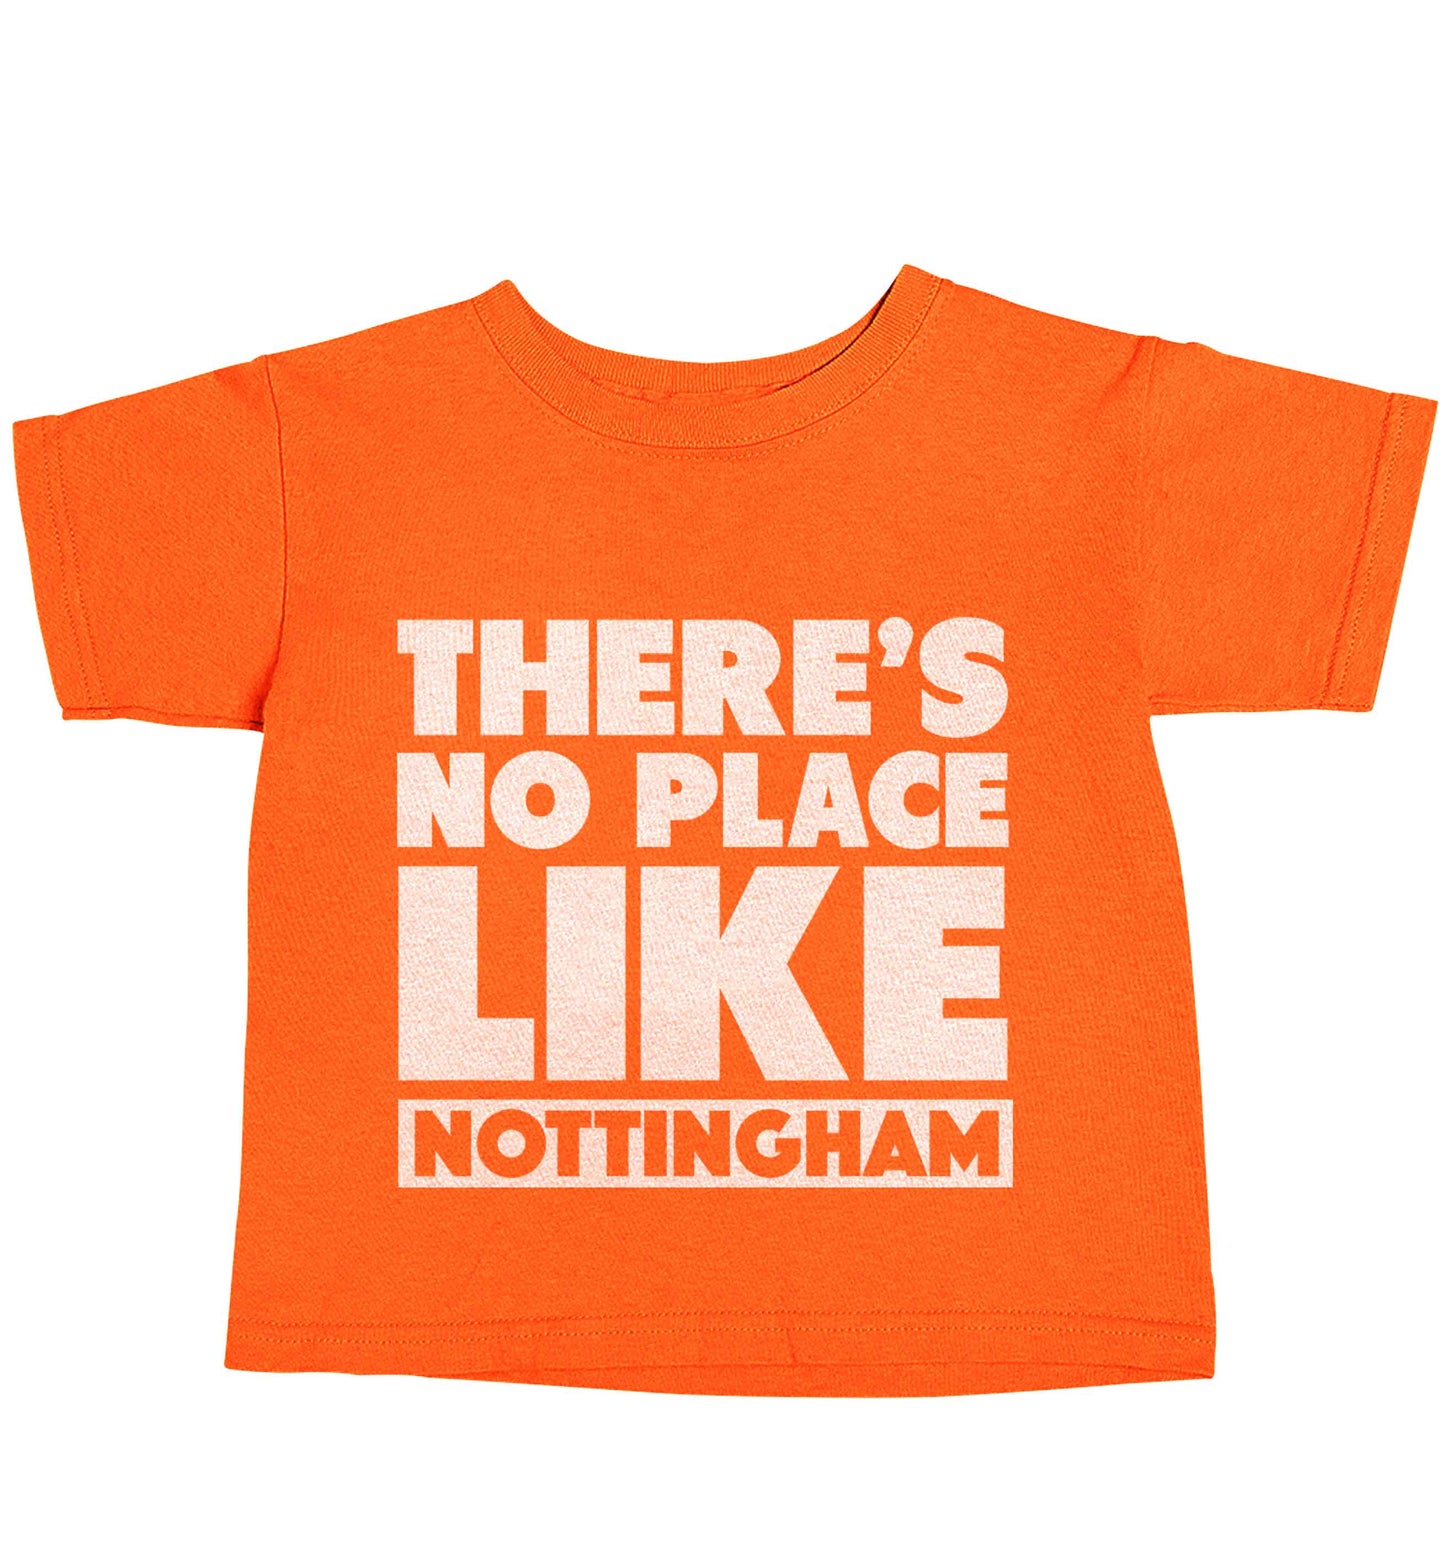 There's no place like Nottingham orange baby toddler Tshirt 2 Years